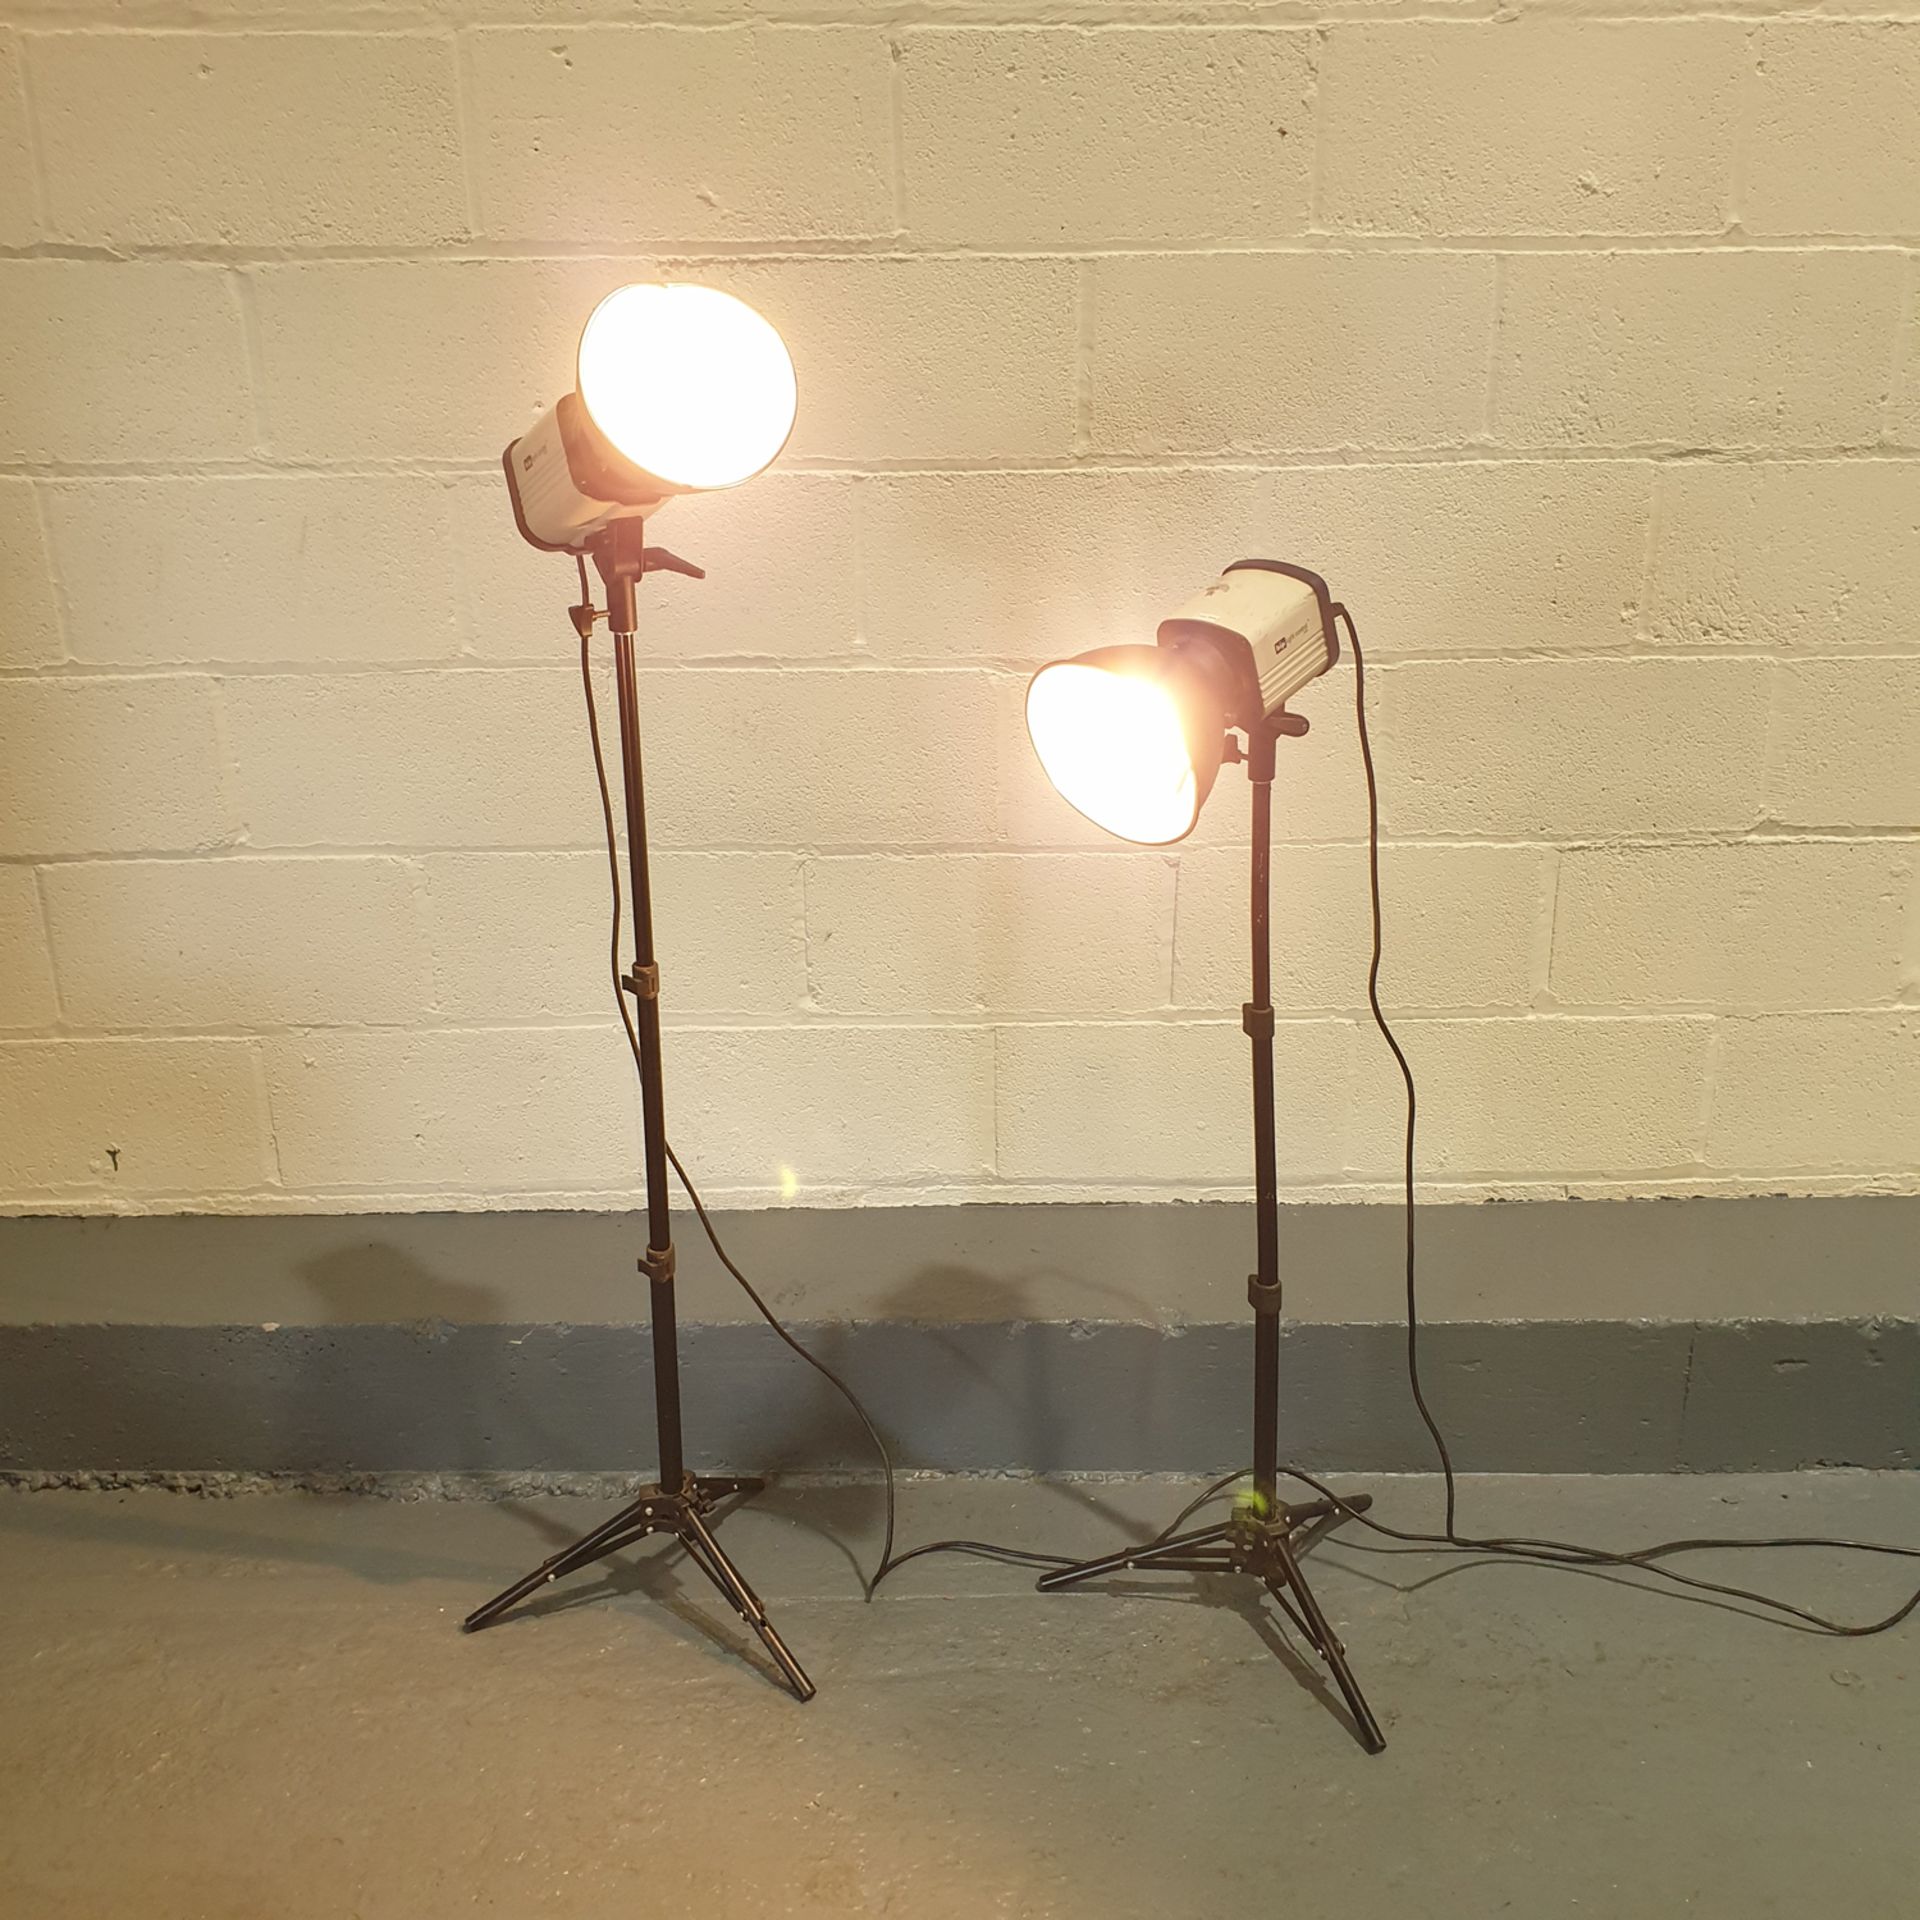 bip Light Control Fluorescent Lamps with Adjustable Tripod Stands. - Image 2 of 12